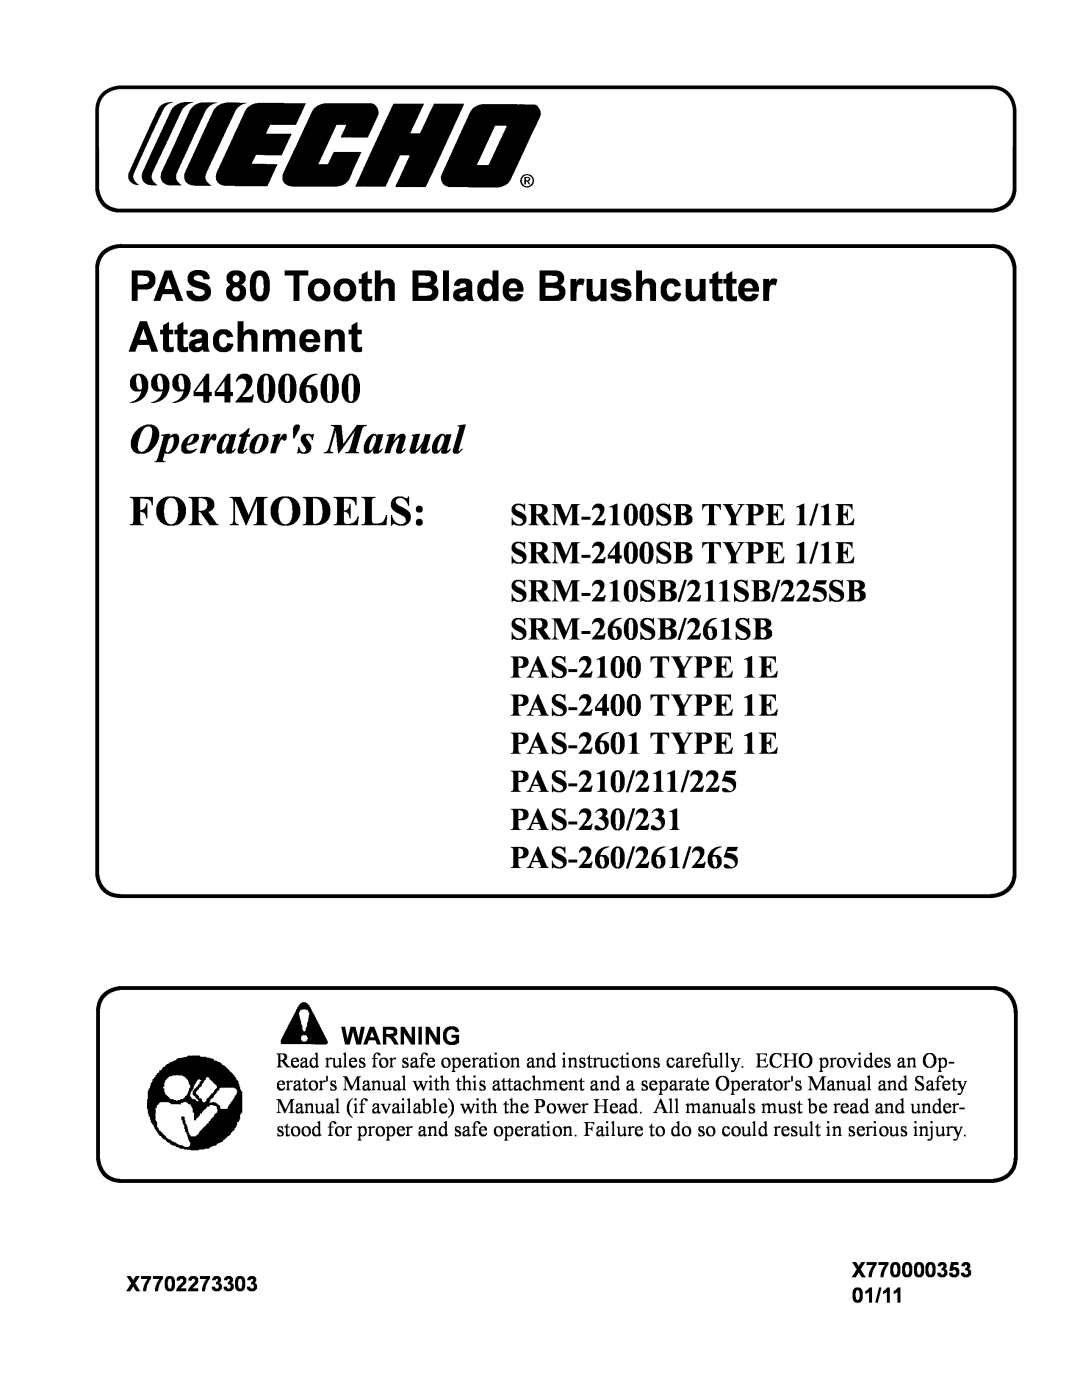 Echo PAS-260/261/265 manual X7702273303, 01/11, PAS 80 Tooth Blade Brushcutter Attachment, Operators Manual FOR MODELS 